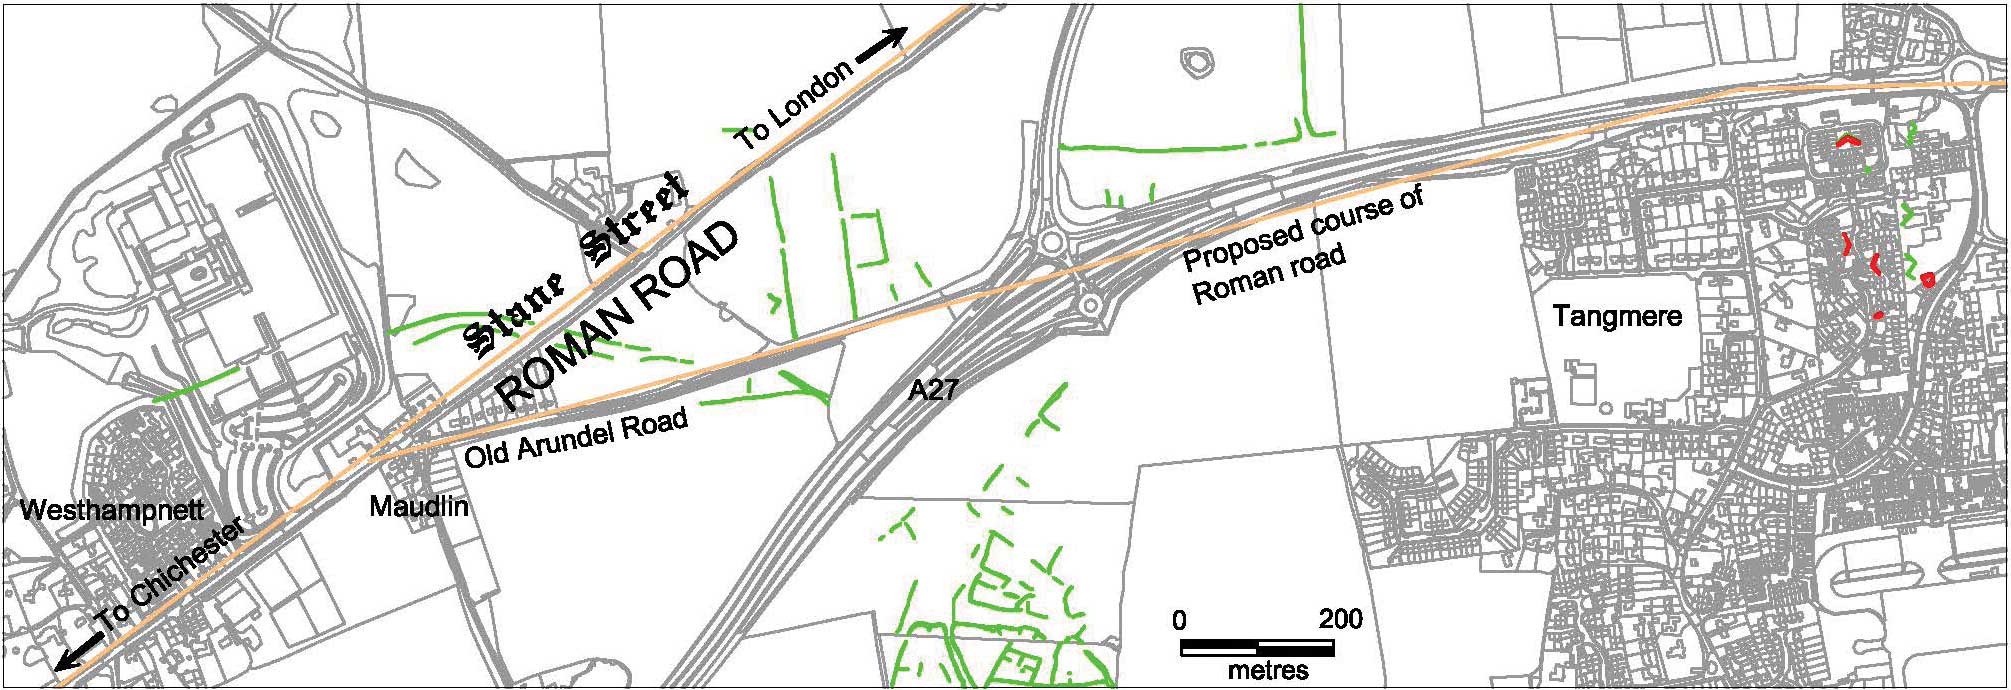 Map of Stane Street Roman Road with recent discoveries annotated